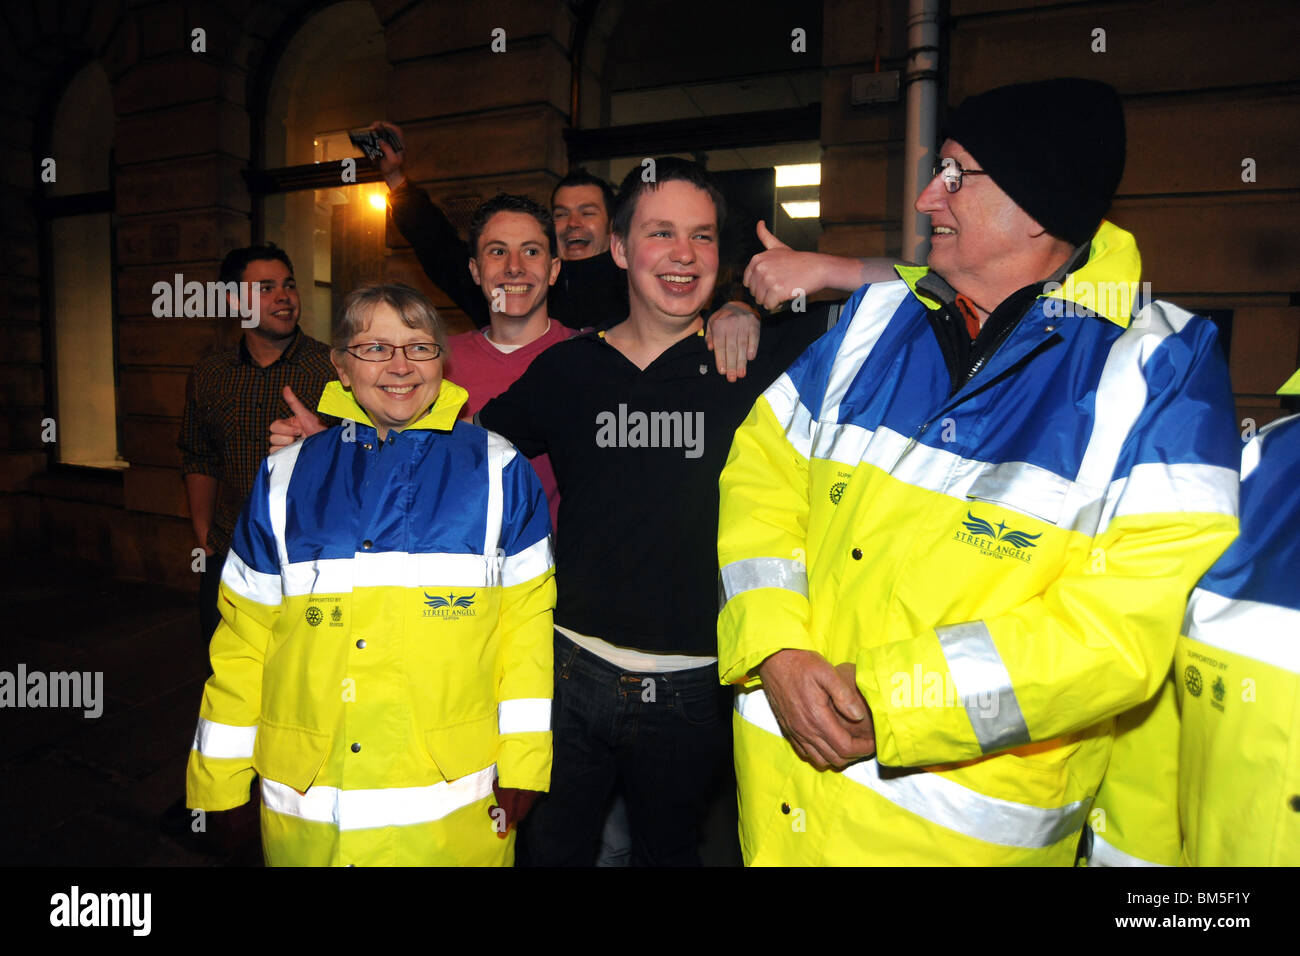 Street Angels patrol the town centre of Skipton to help drinkers and vulnerable members of the community. Stock Photo